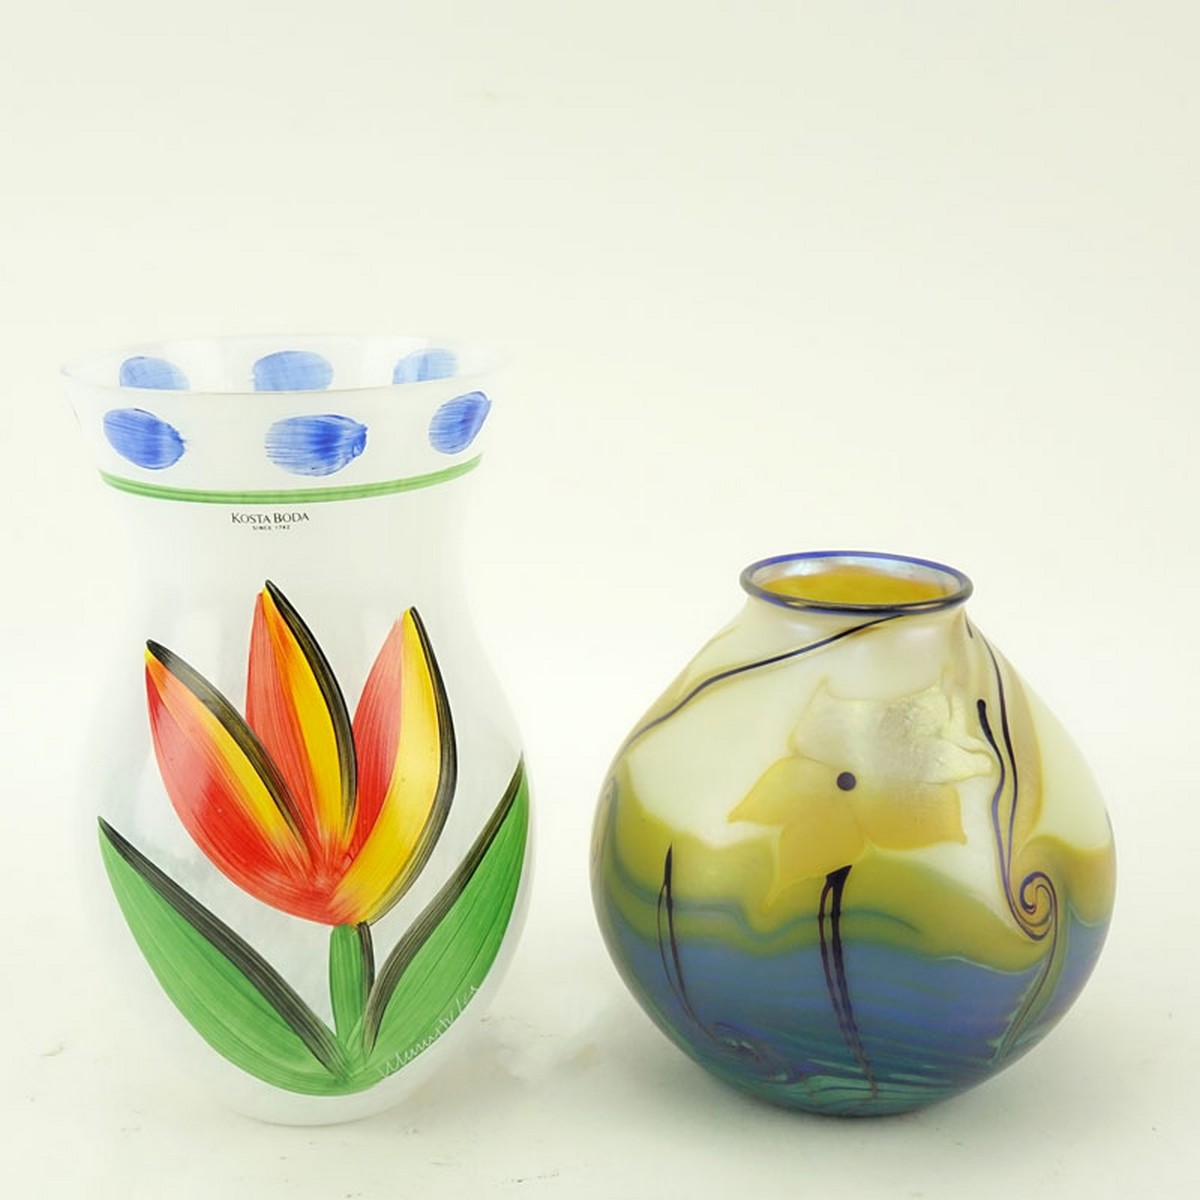 Grouping of Two (2): Kosta Boda Tulipa Vase, Orient and Flume Art Glass Vase. Each appropriately signed, Kosta Boda has original sticker attached.